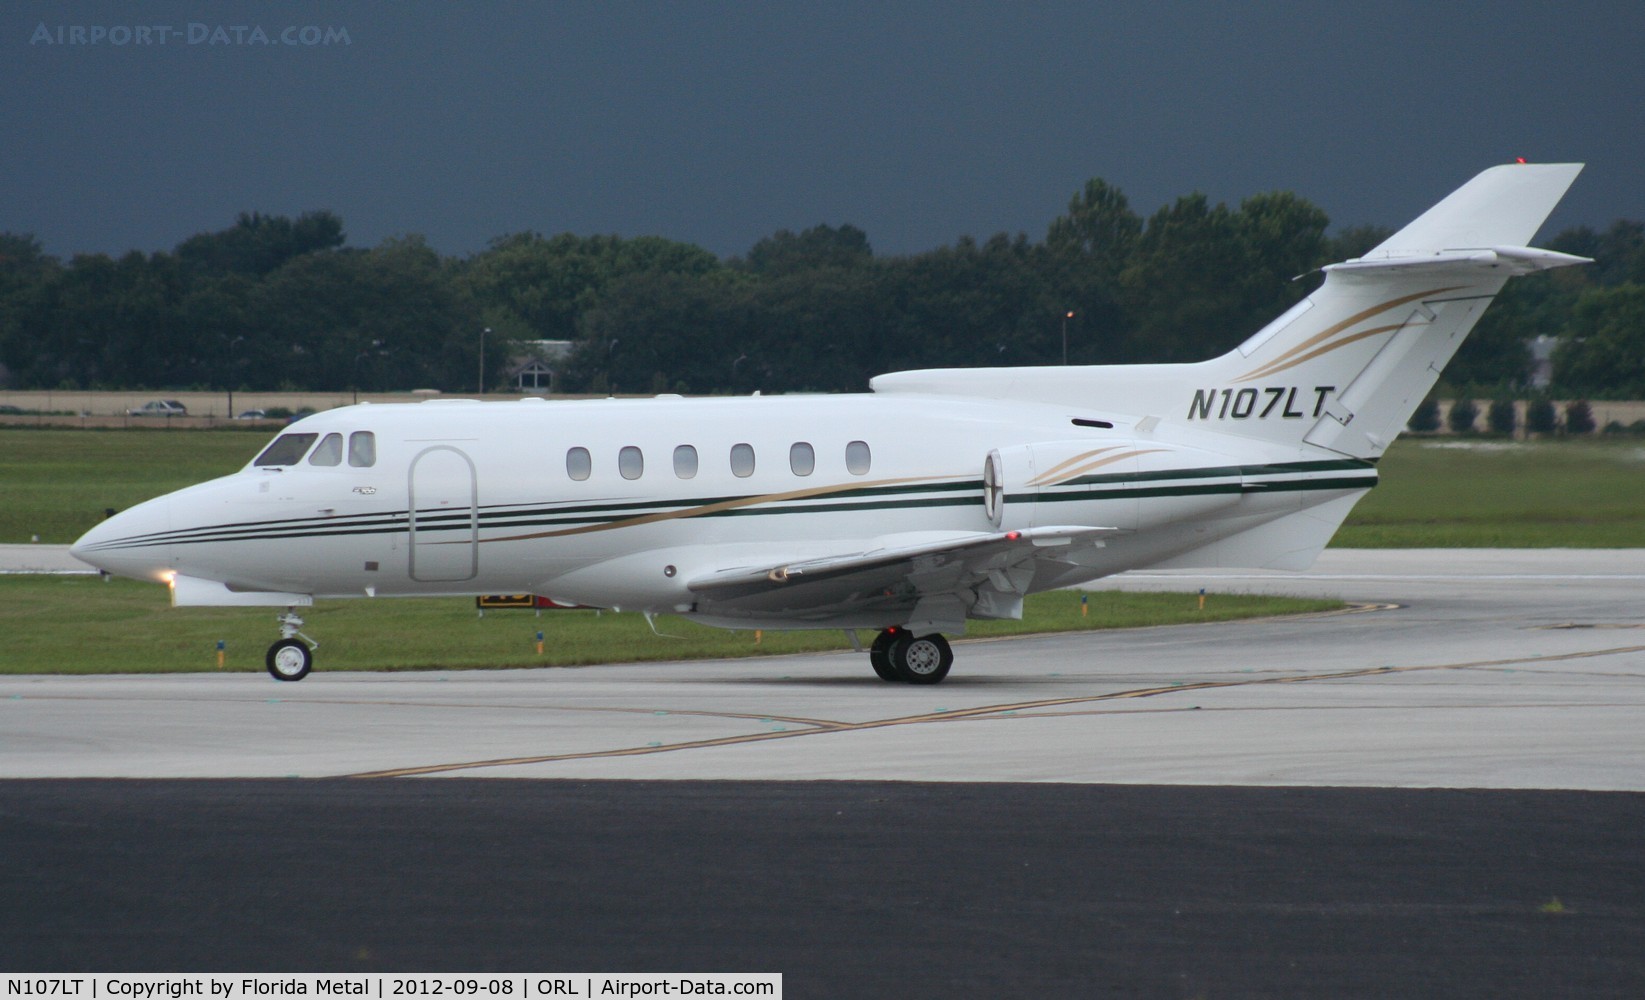 N107LT, 1981 British Aerospace HS.125-700A C/N 257146/NA0301, BAE HS700A with arriving storms